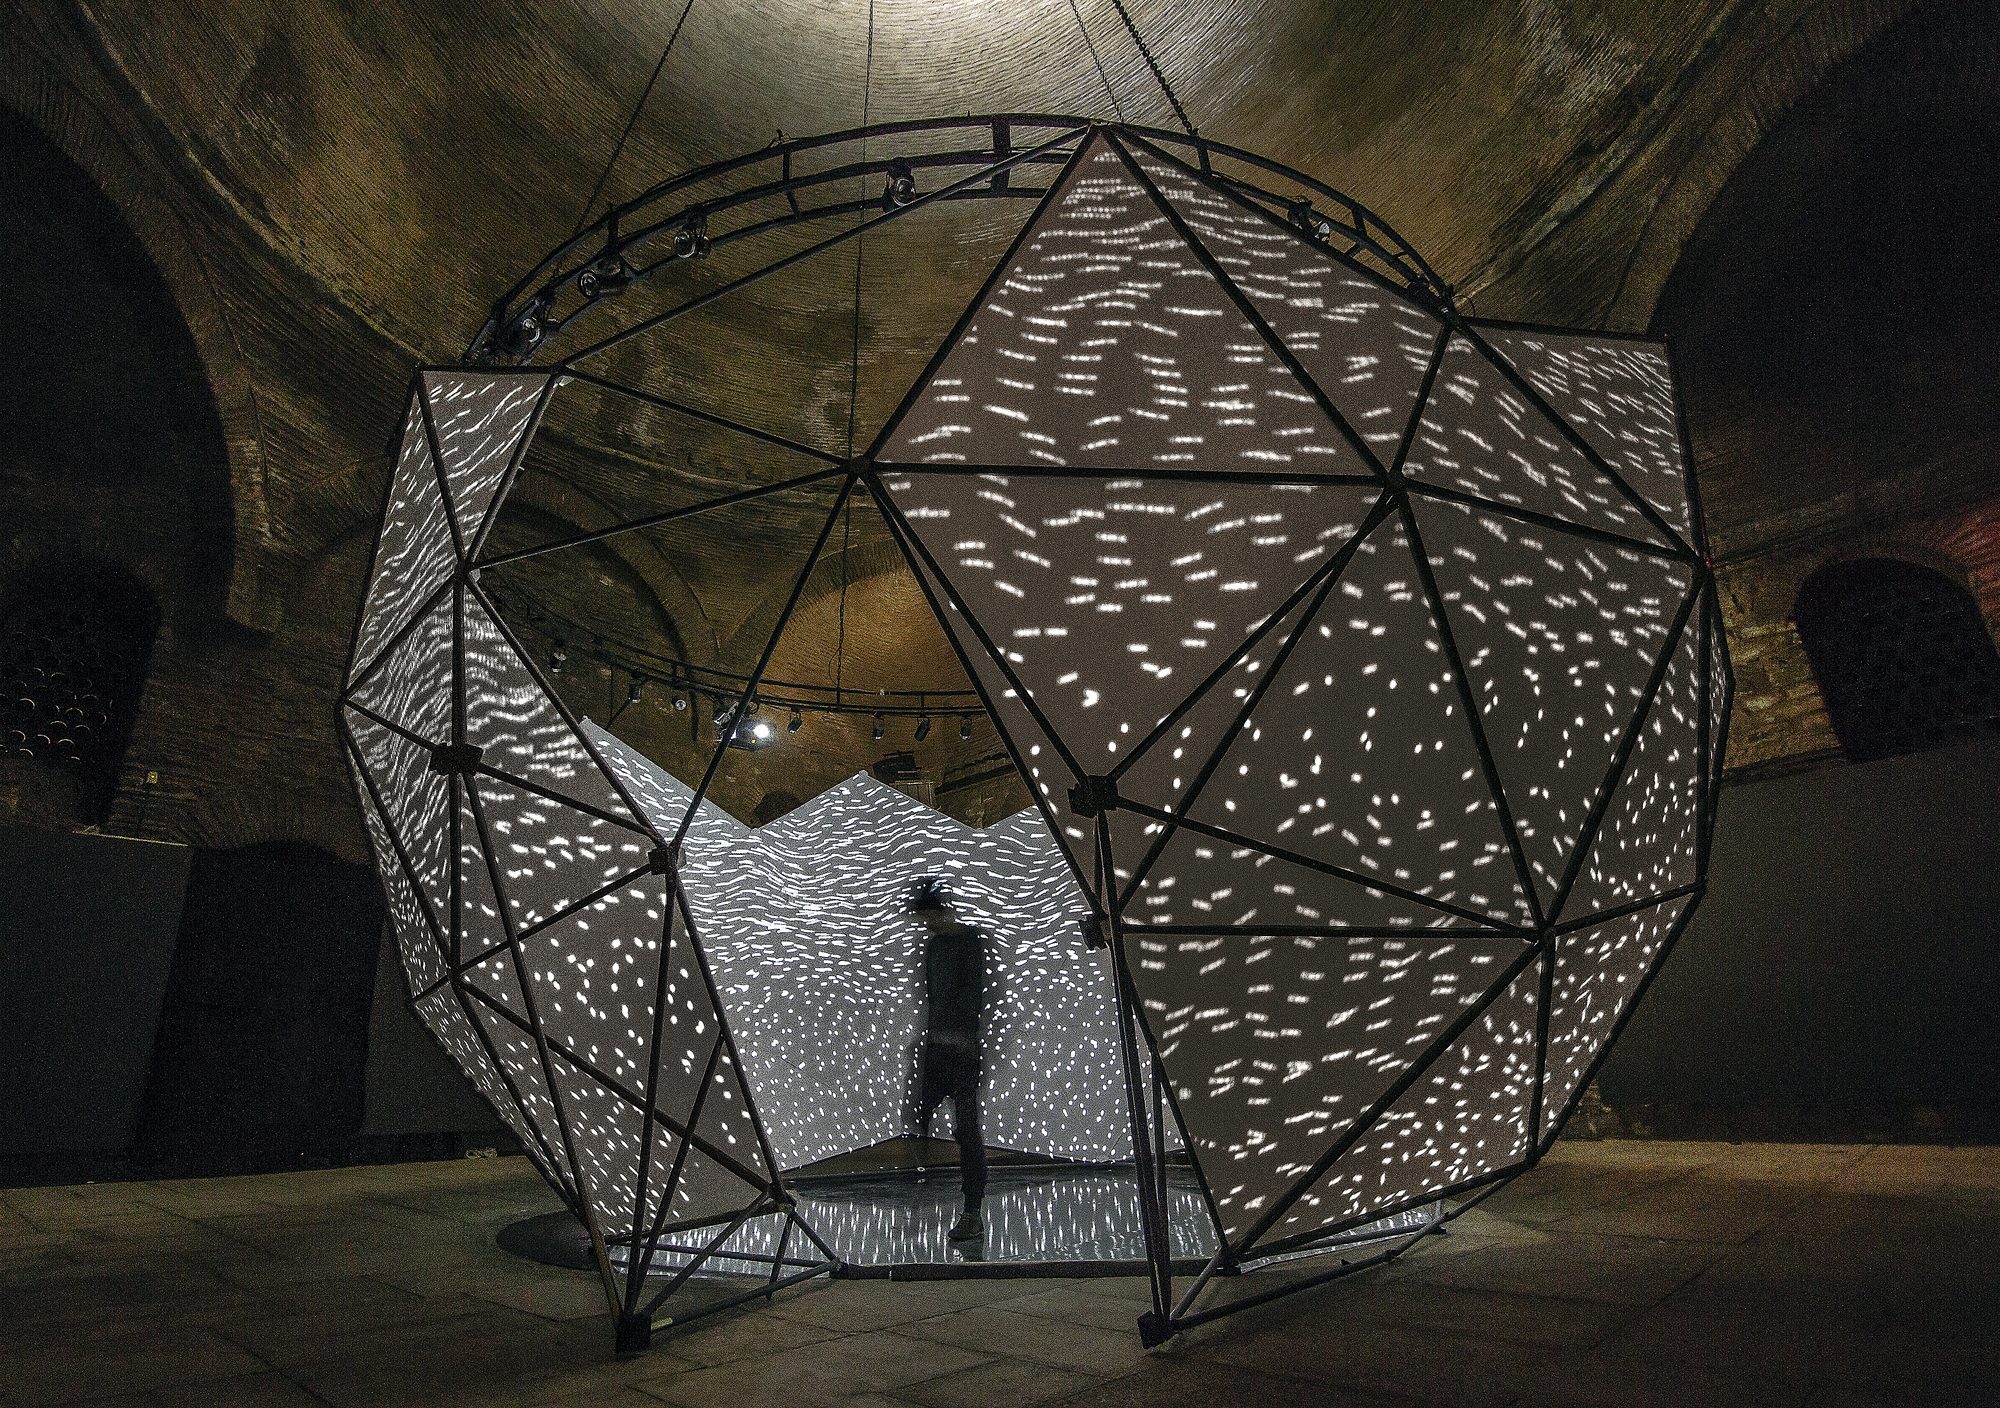 Gallery of NOHlab and Buşra Tunç Create Immersive Installation Based ...